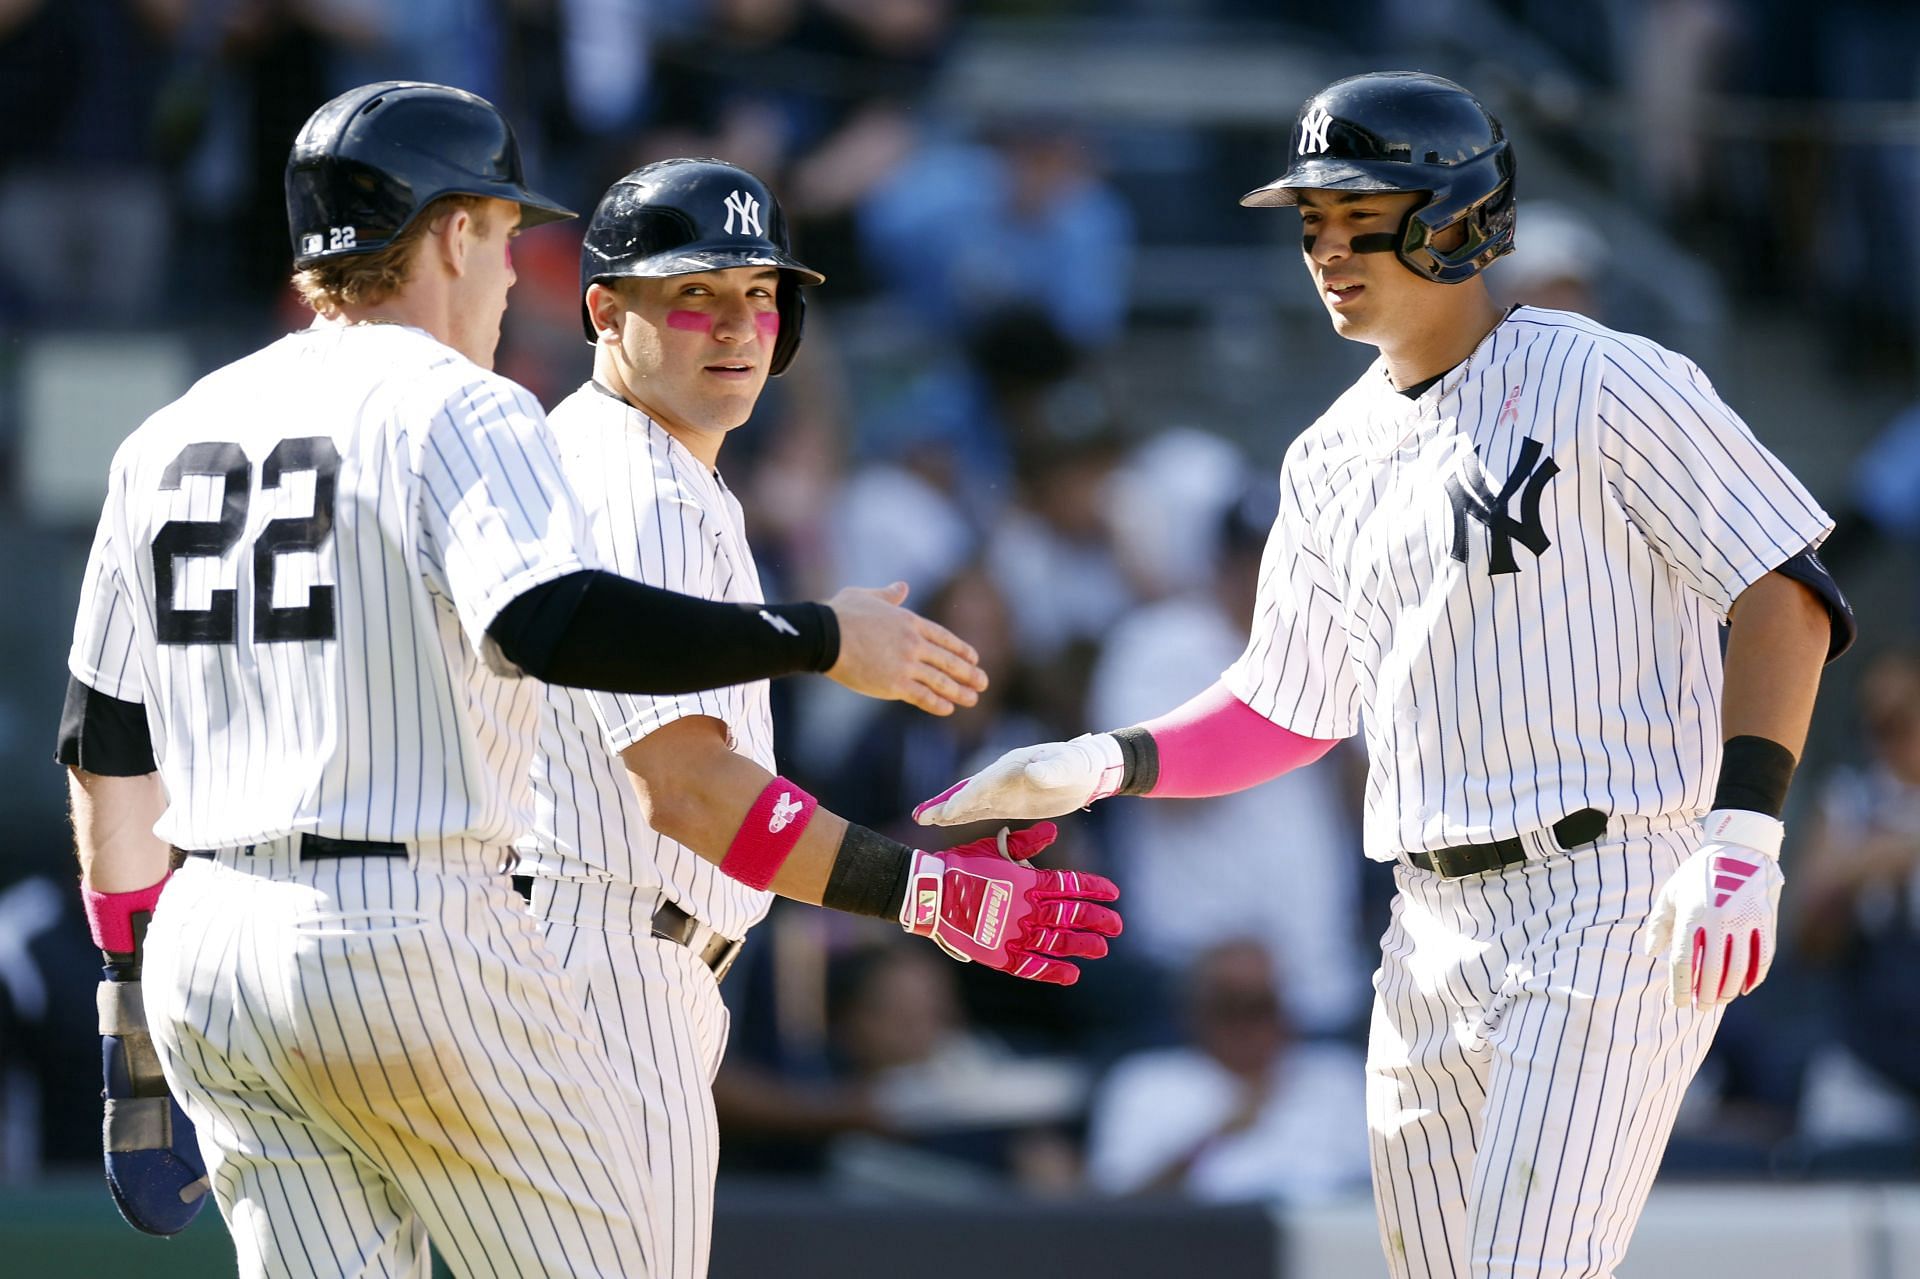 Jose Trevino injury update: Yankees C heading to 10-day IL due to